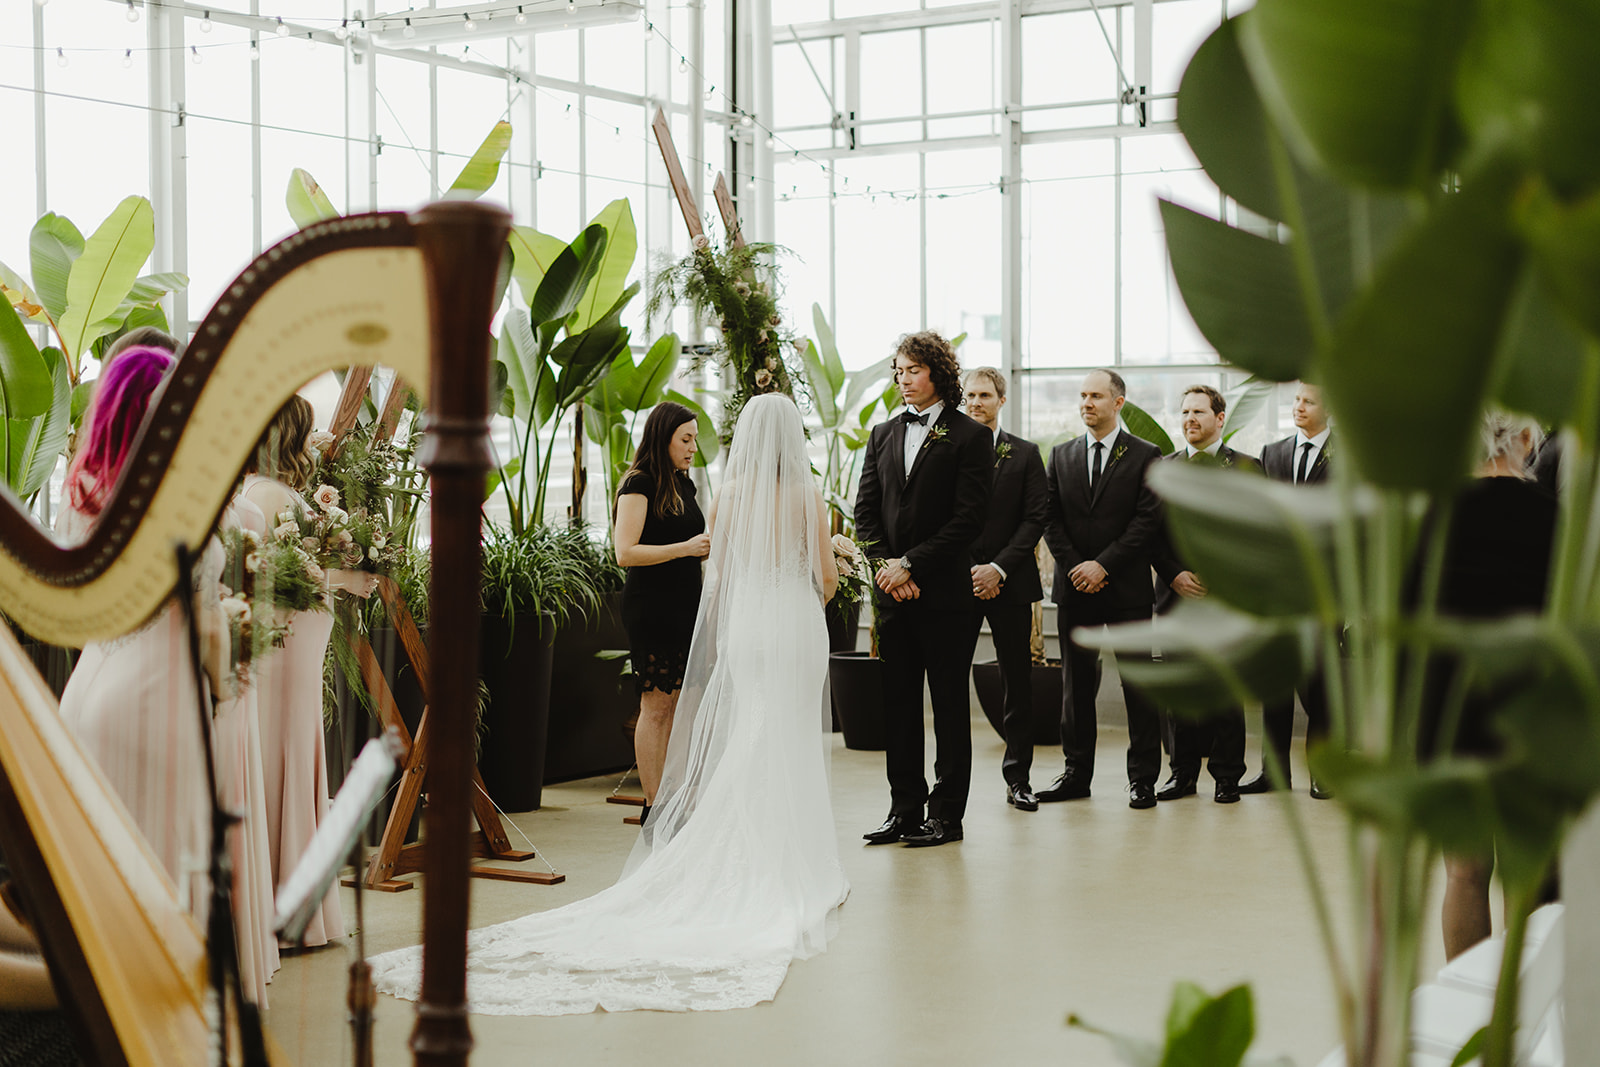 A ceremony taking place during a Downtown Market Grand Rapids wedding